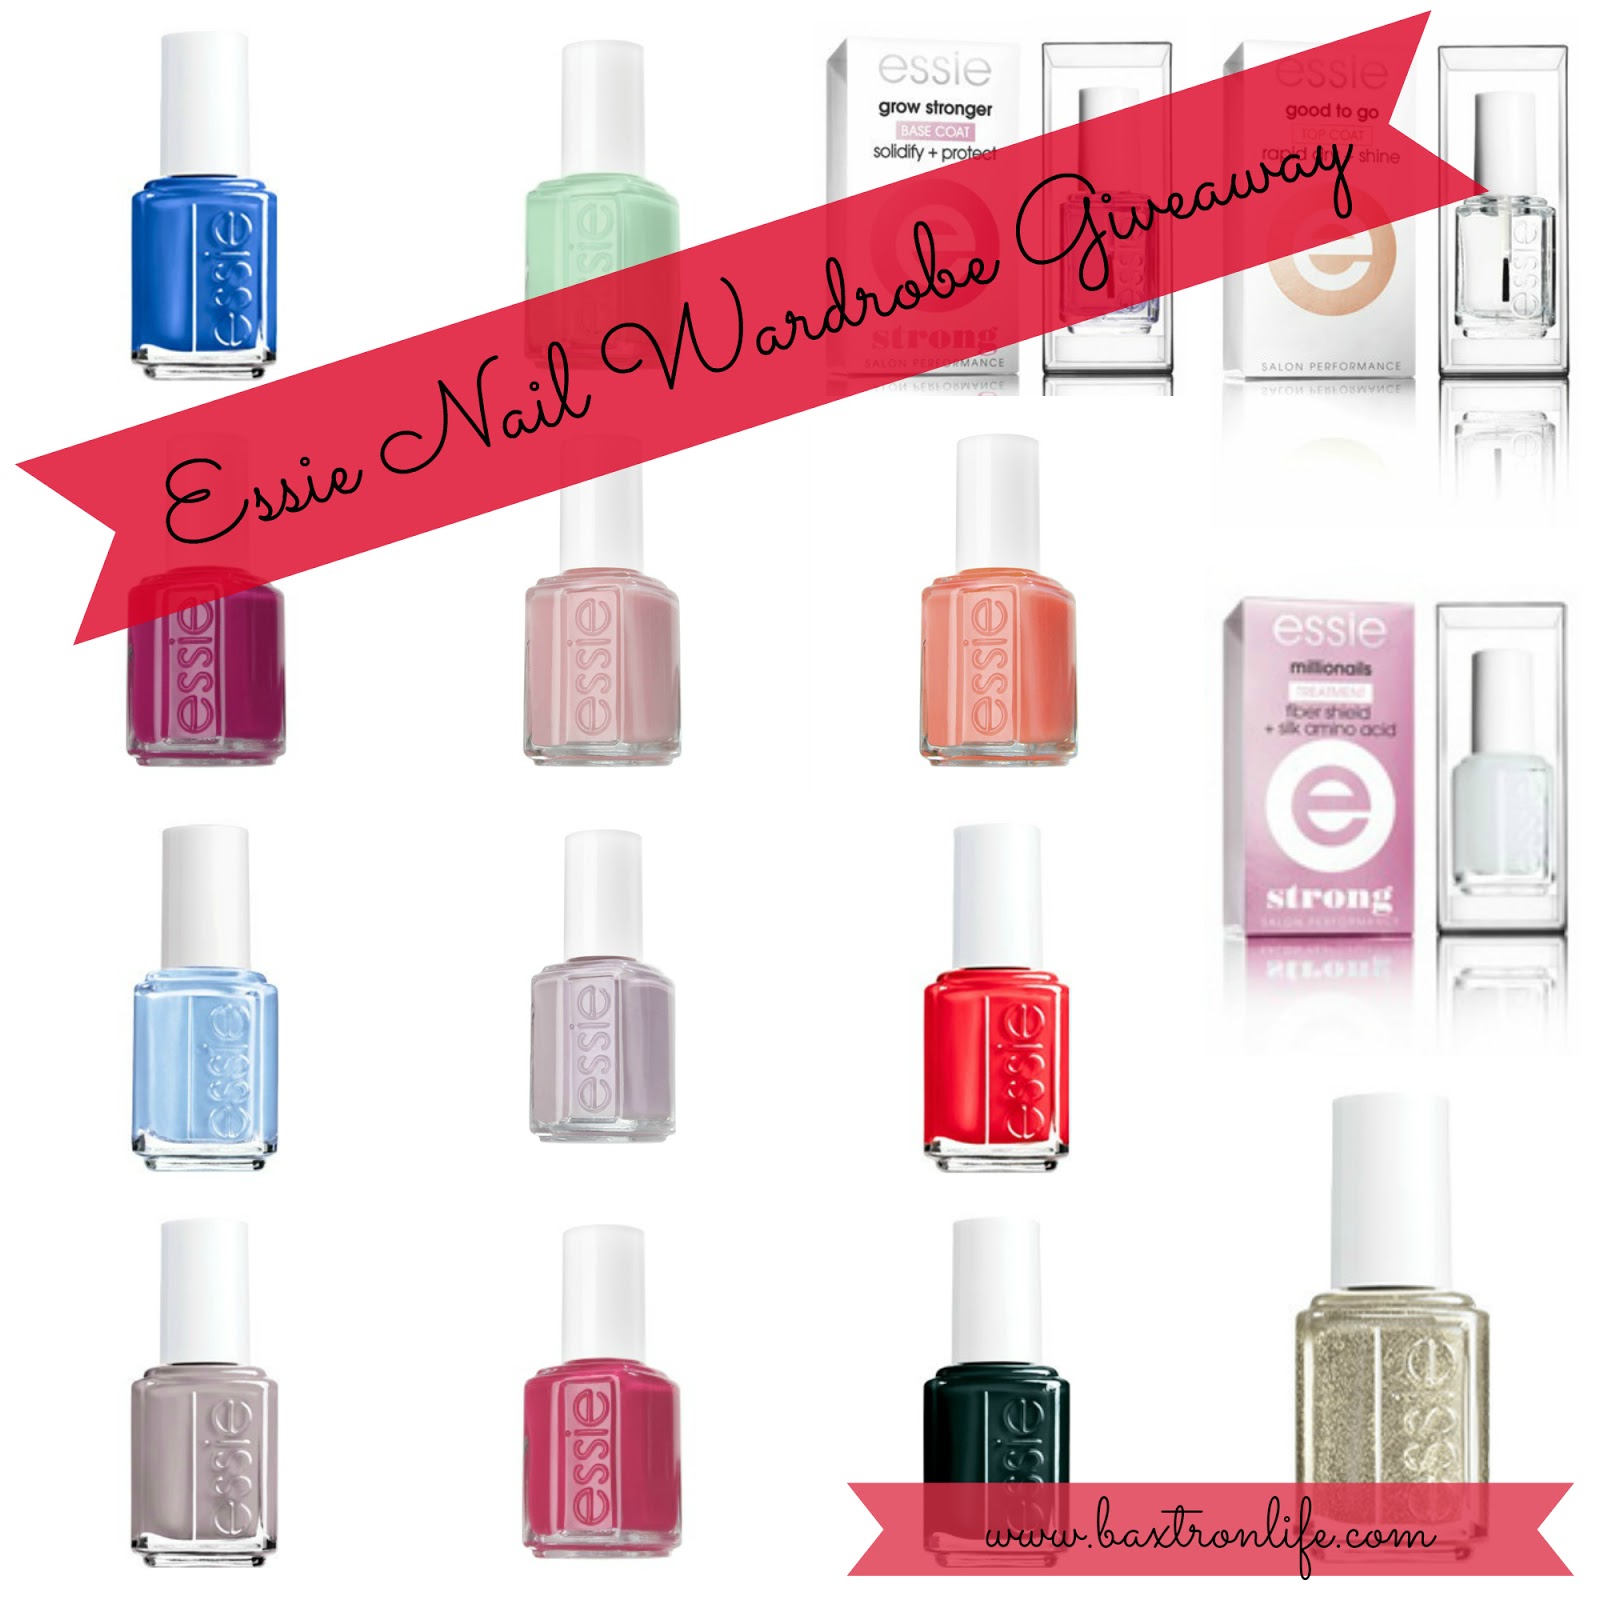 Nail Polish Displays and an Essie Giveaway! | A Night Owl Blog